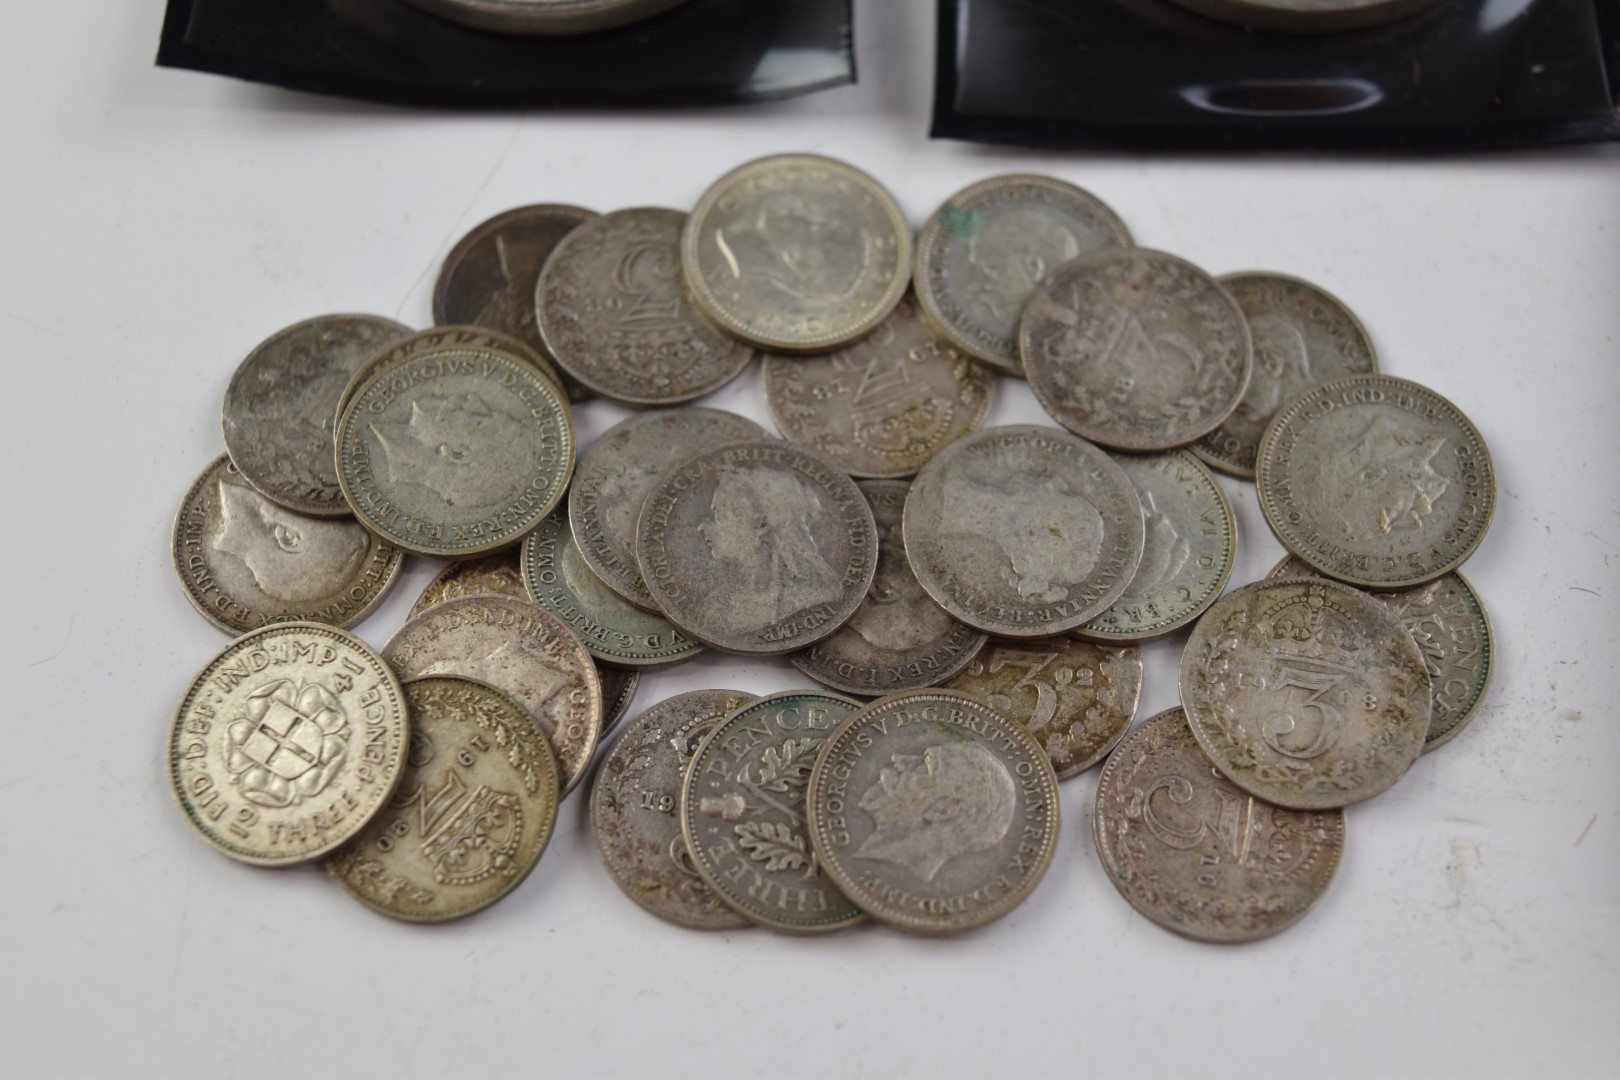 Vintage cash box containing modern crowns, £2 coins, Kennedy half dollars and approximately 41g of - Image 5 of 7